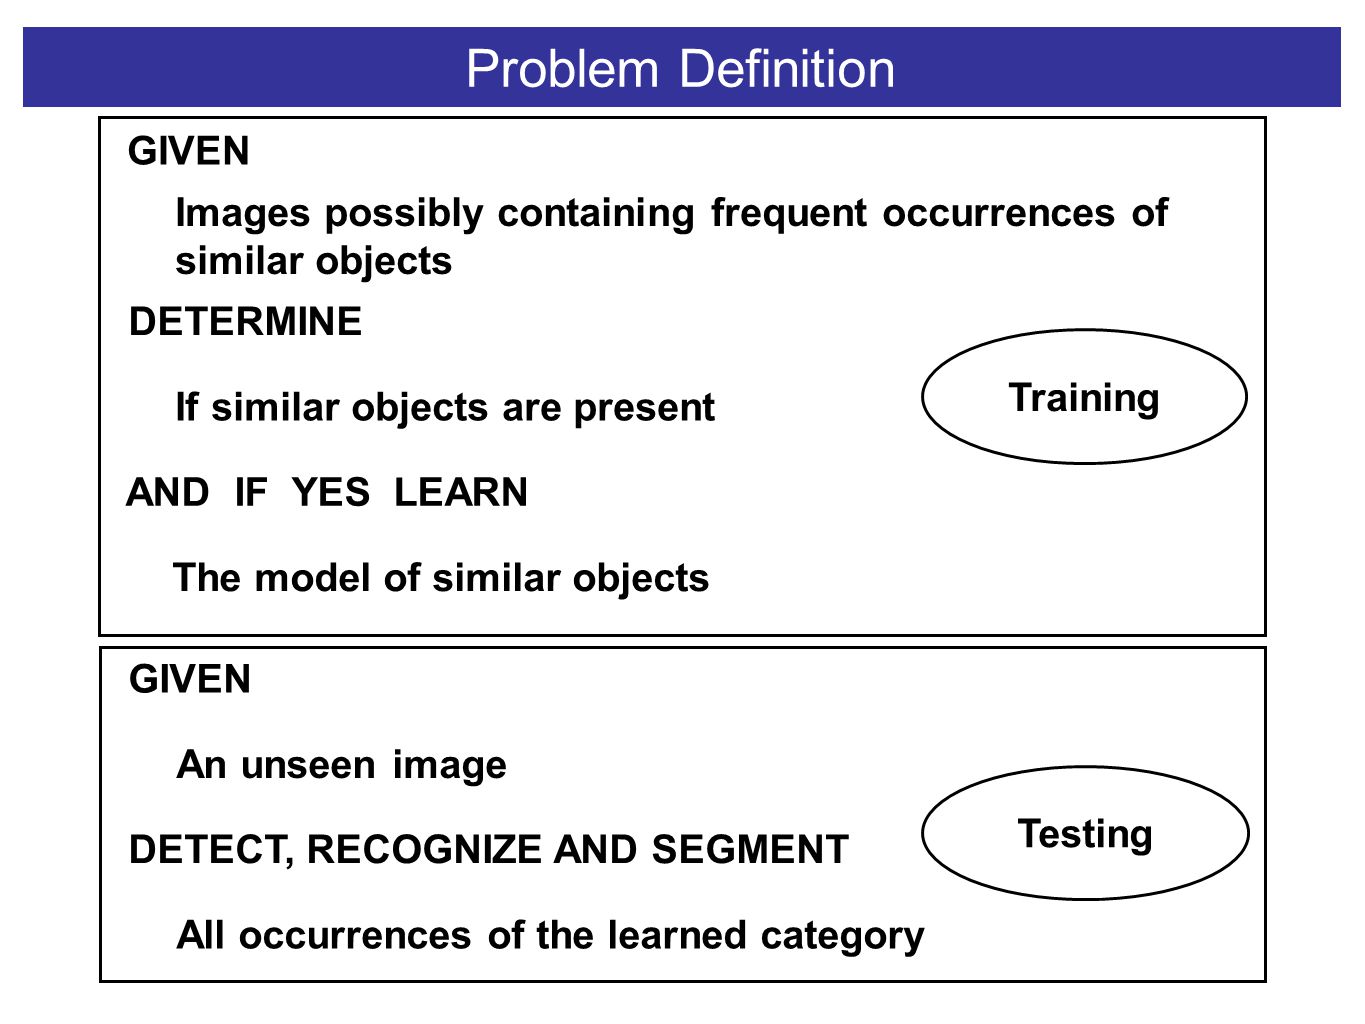 Training Problem Definition GIVEN Images possibly containing frequent occurrences of similar objects DETERMINE If similar objects are present AND IF YES LEARN The model of similar objects GIVEN An unseen image DETECT, RECOGNIZE AND SEGMENT All occurrences of the learned category Testing